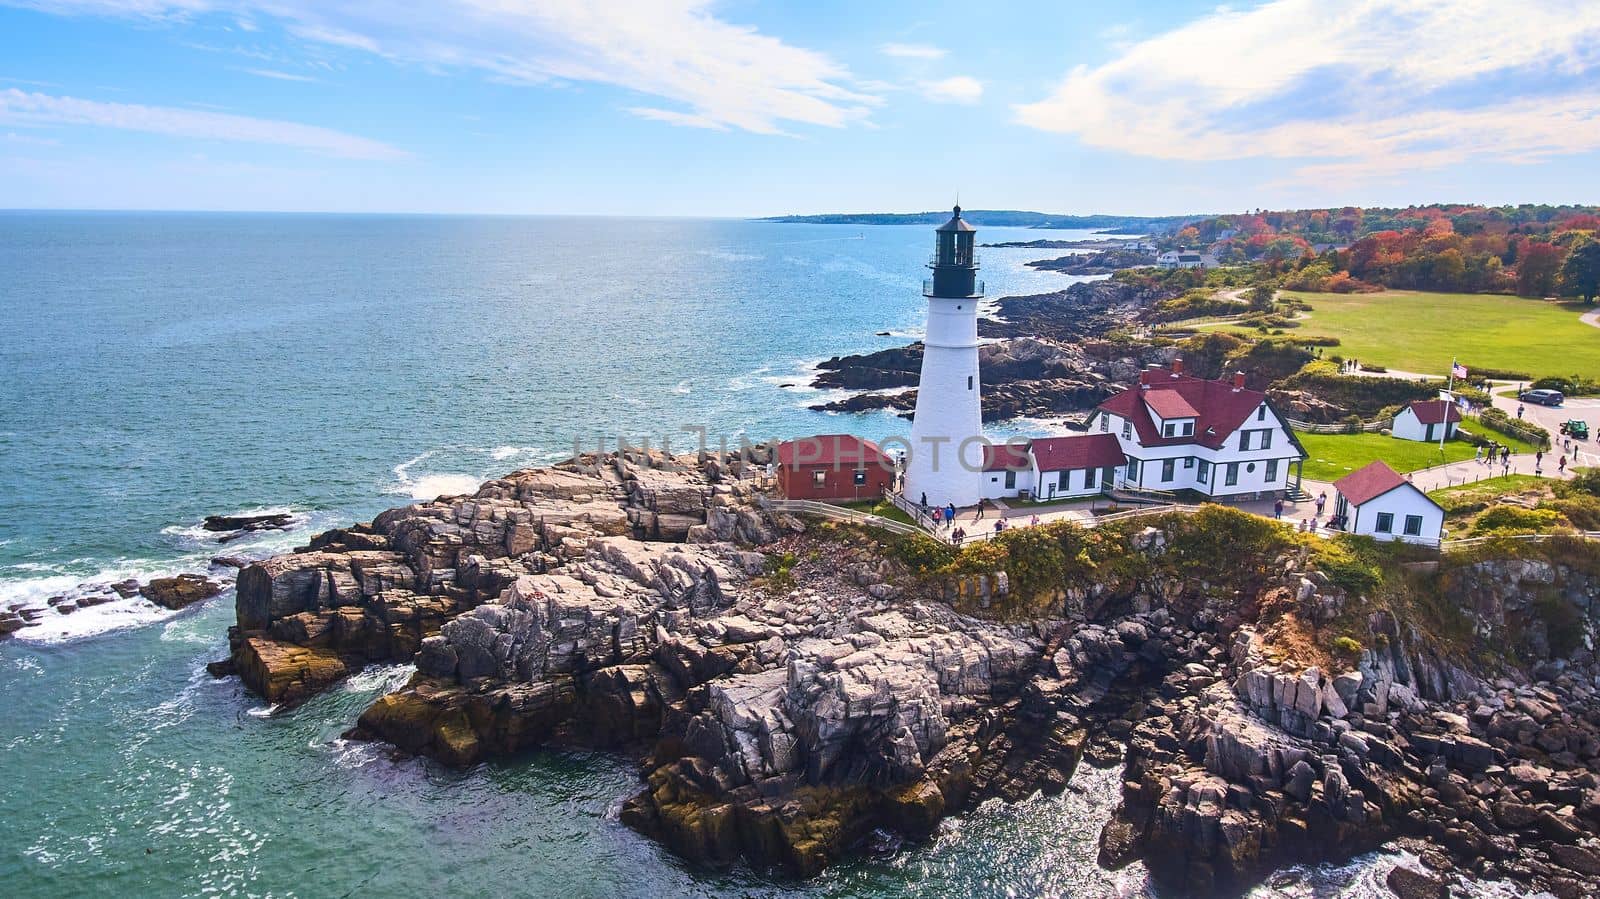 Image of Aerial view of Maine coastline with rocky cliffs and iconic white lighthouse